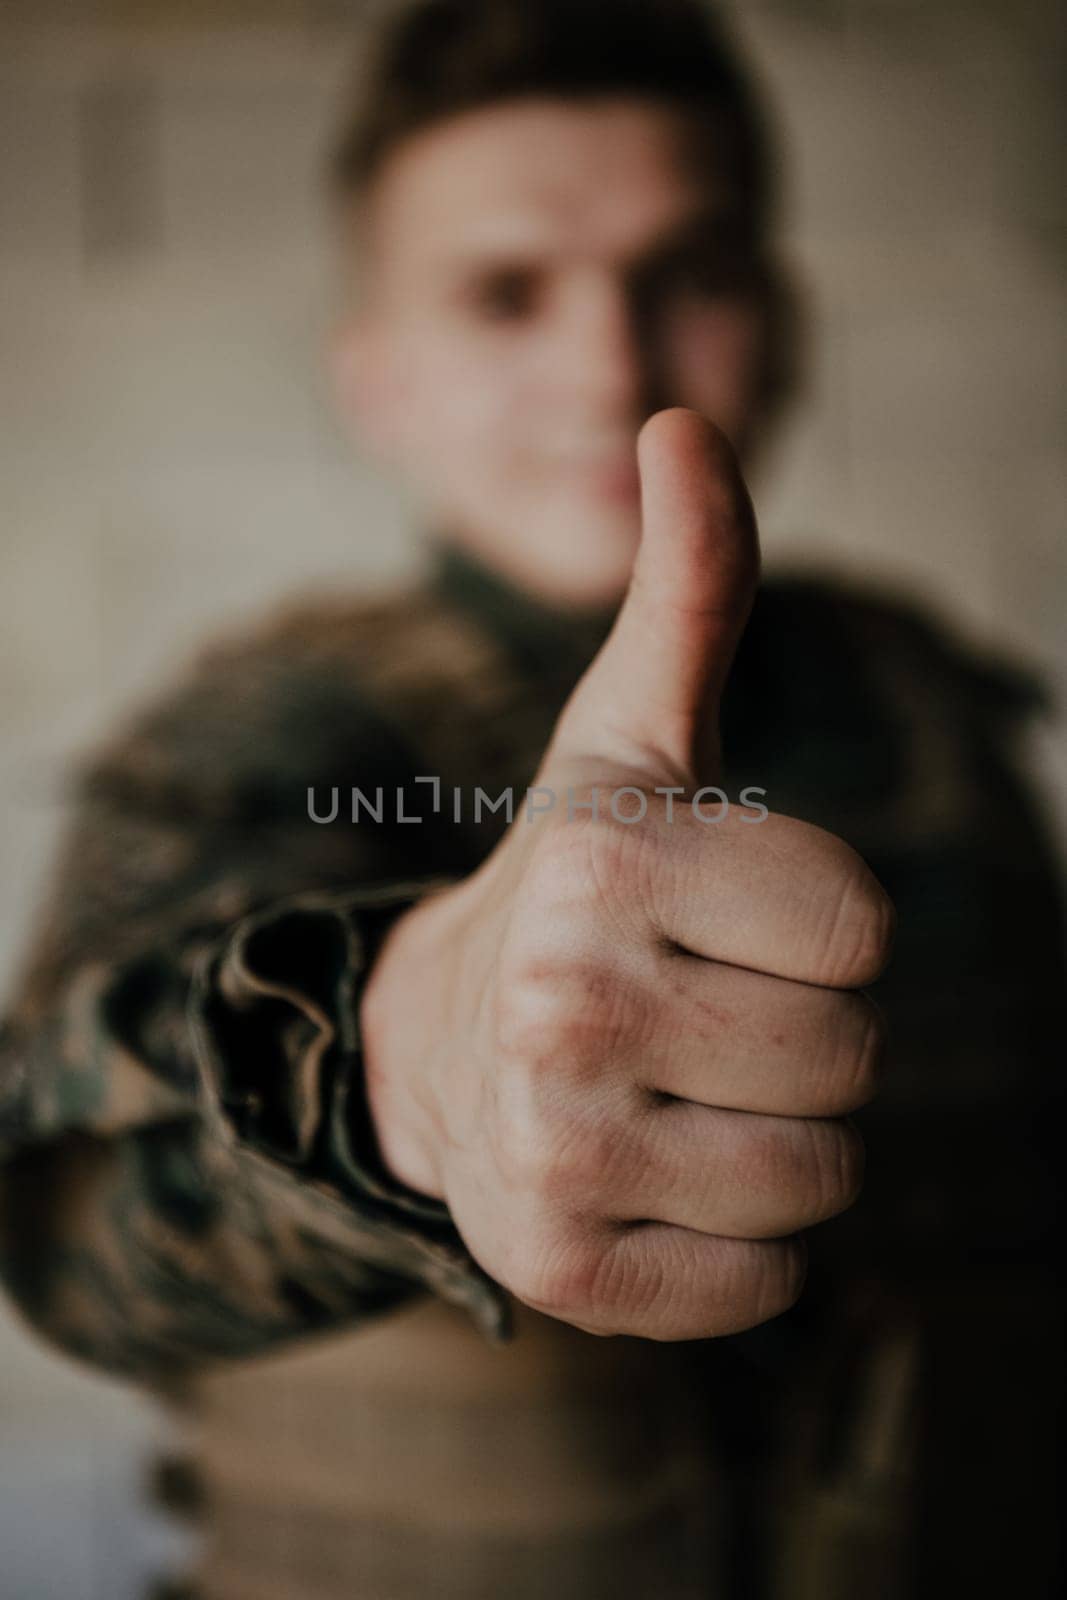 The soldier makes a gesture of success with his hand. A soldier in full war gear stands in front of a stone wall and shows the ok sign with his finger.